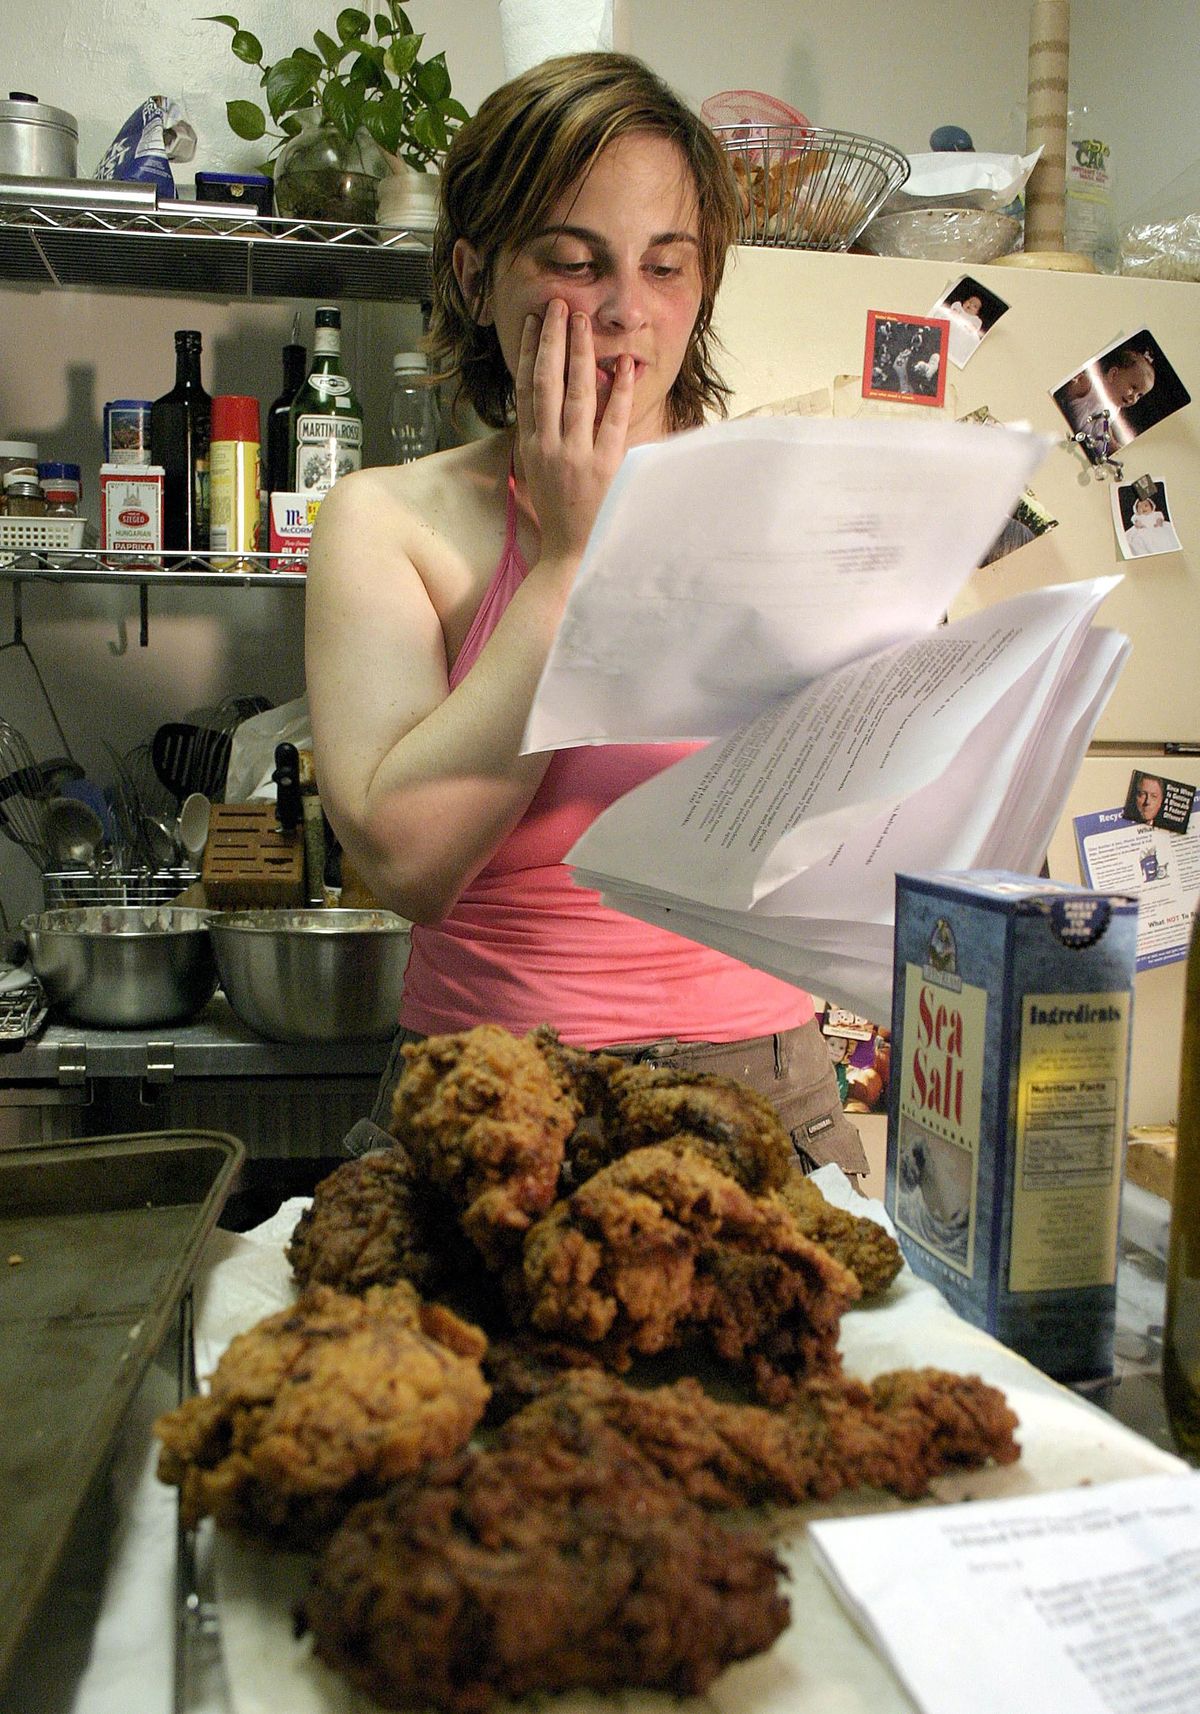  Julie Powell, cooks dishes featured in the May food magazines, contemplates her next project in New York, May 16, 2004. Powell, the writer whose decision to spend a year cooking every recipe in Julia Child